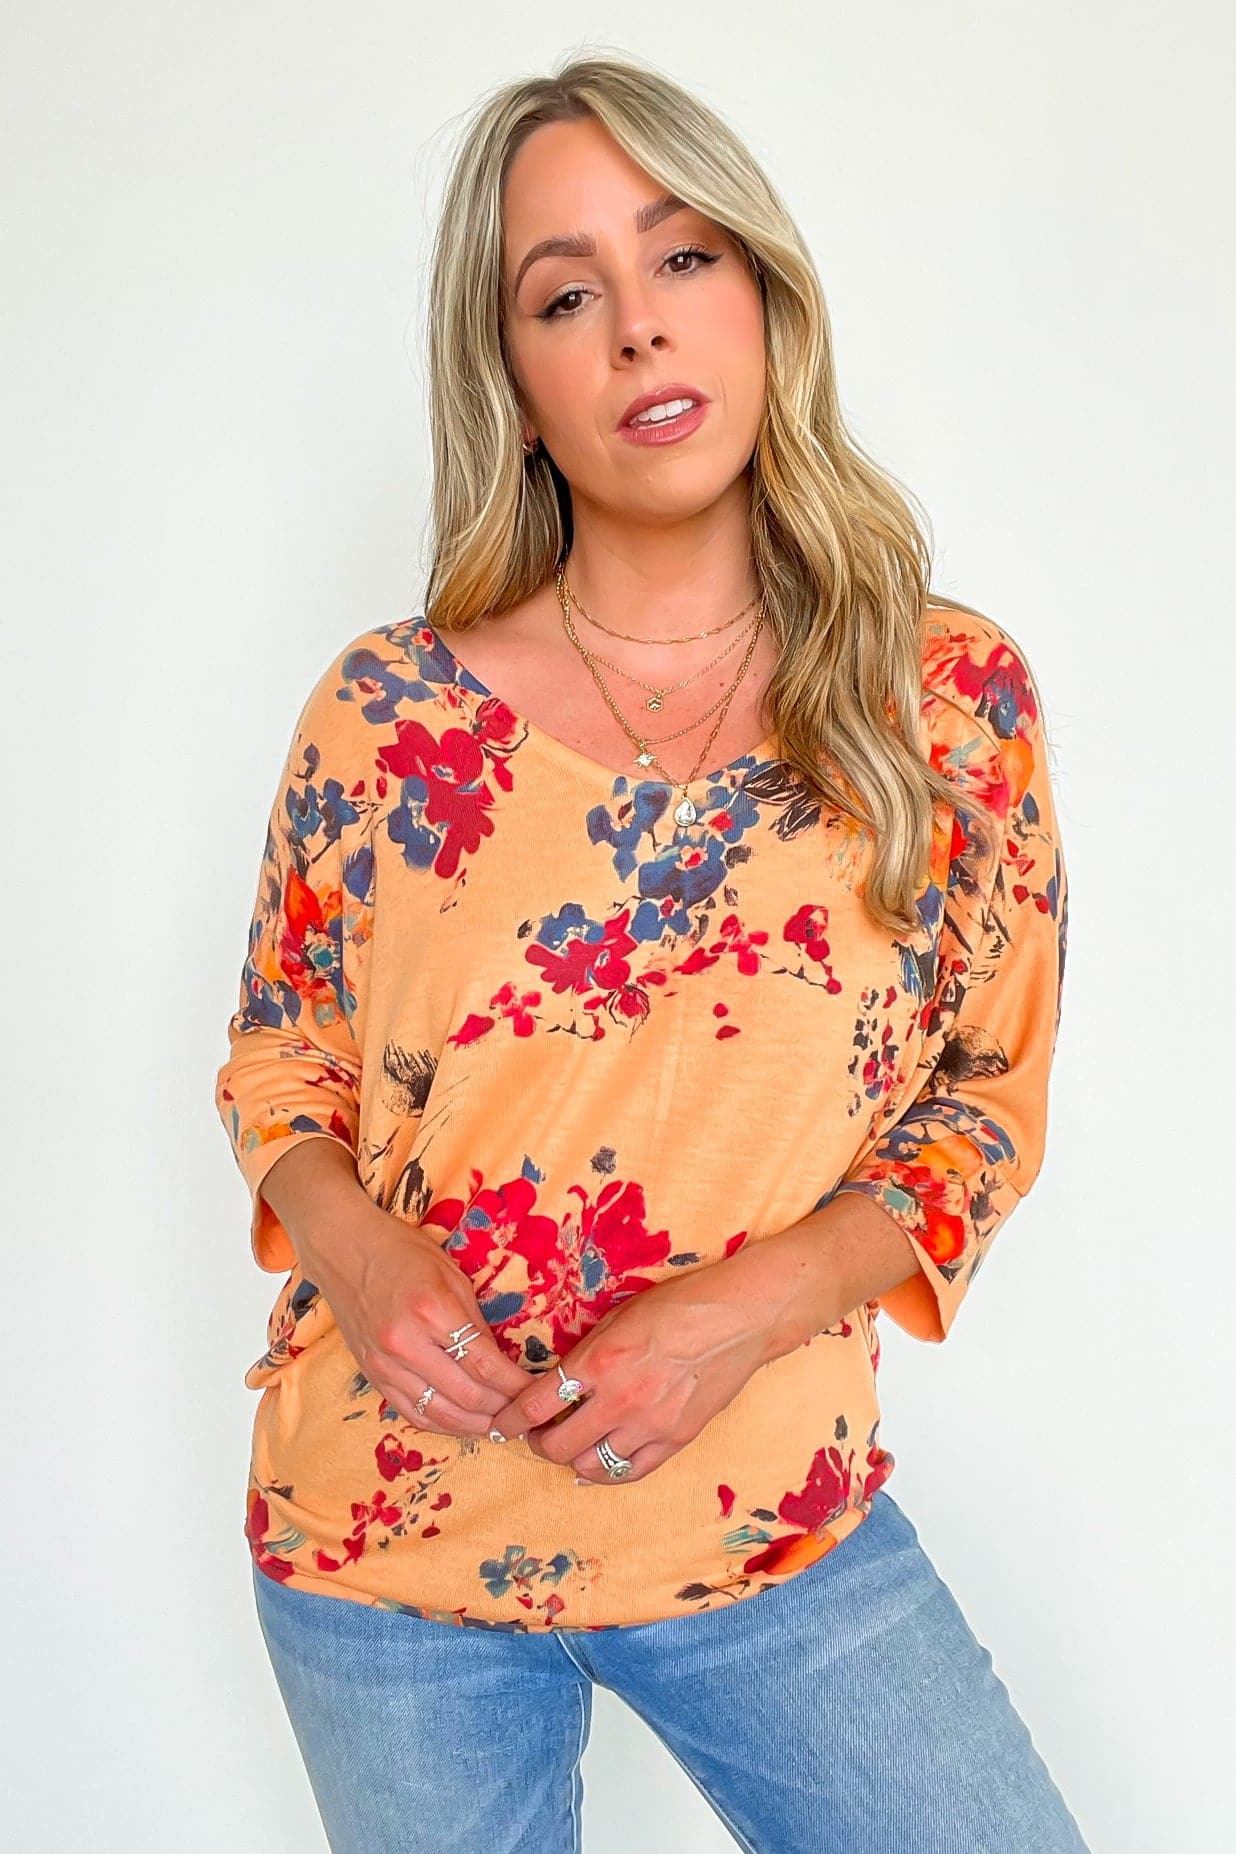  Alluring Expression Criss Cross Back Floral Top - FINAL SALE - Madison and Mallory